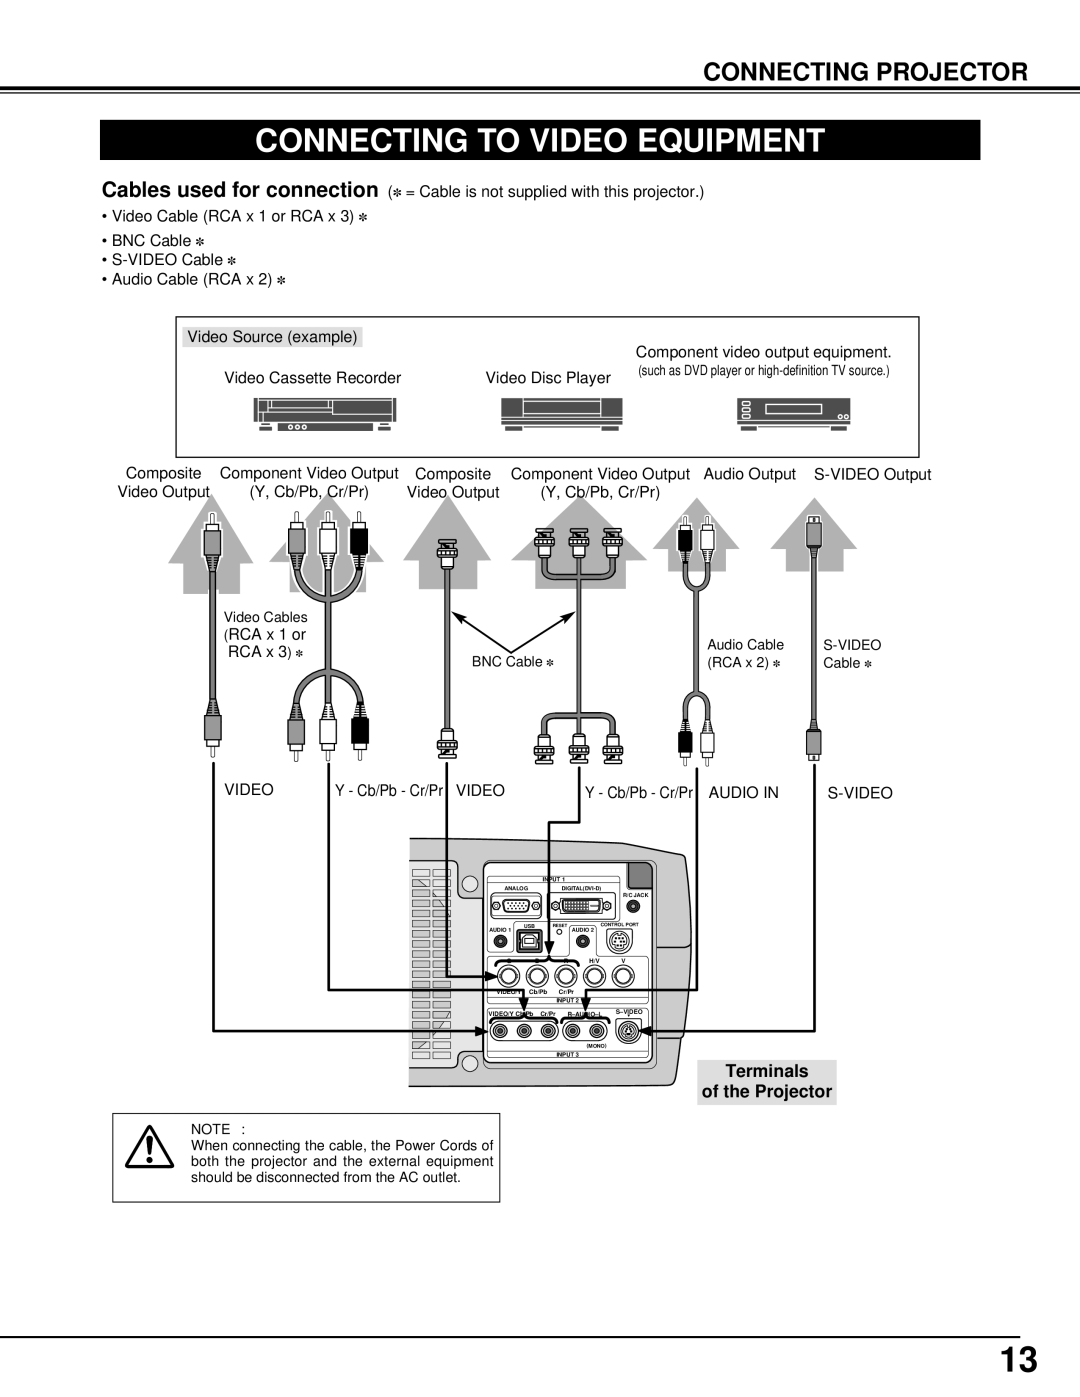 Christie Digital Systems 38-VIV205-01 user manual Connecting To Video Equipment, Connecting Projector 